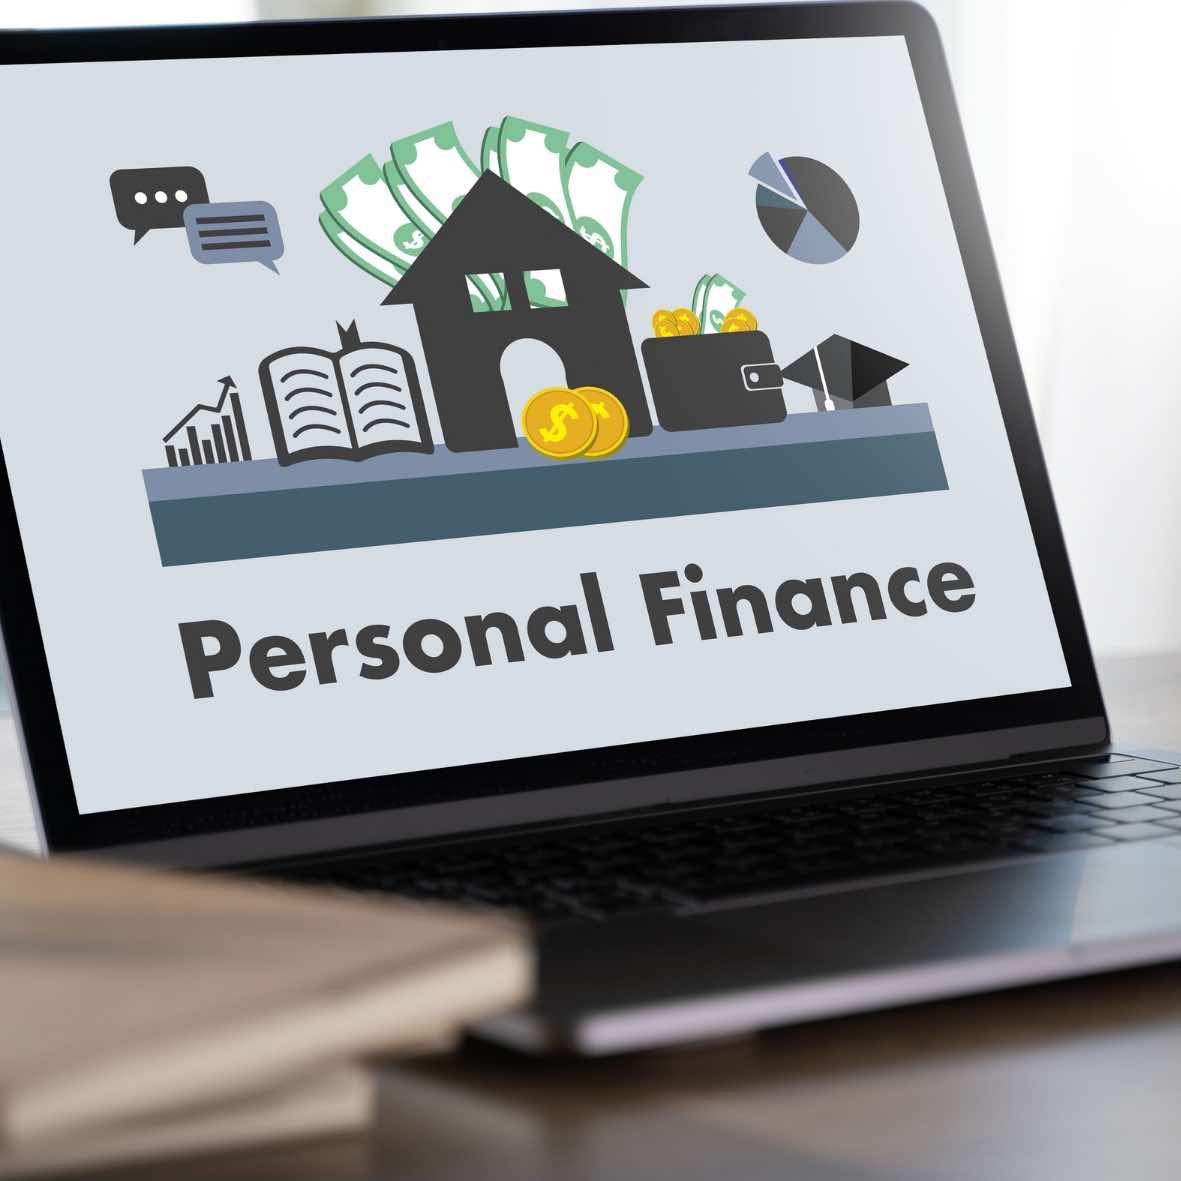 Personal Finance 101: The Guide To Managing Your Money